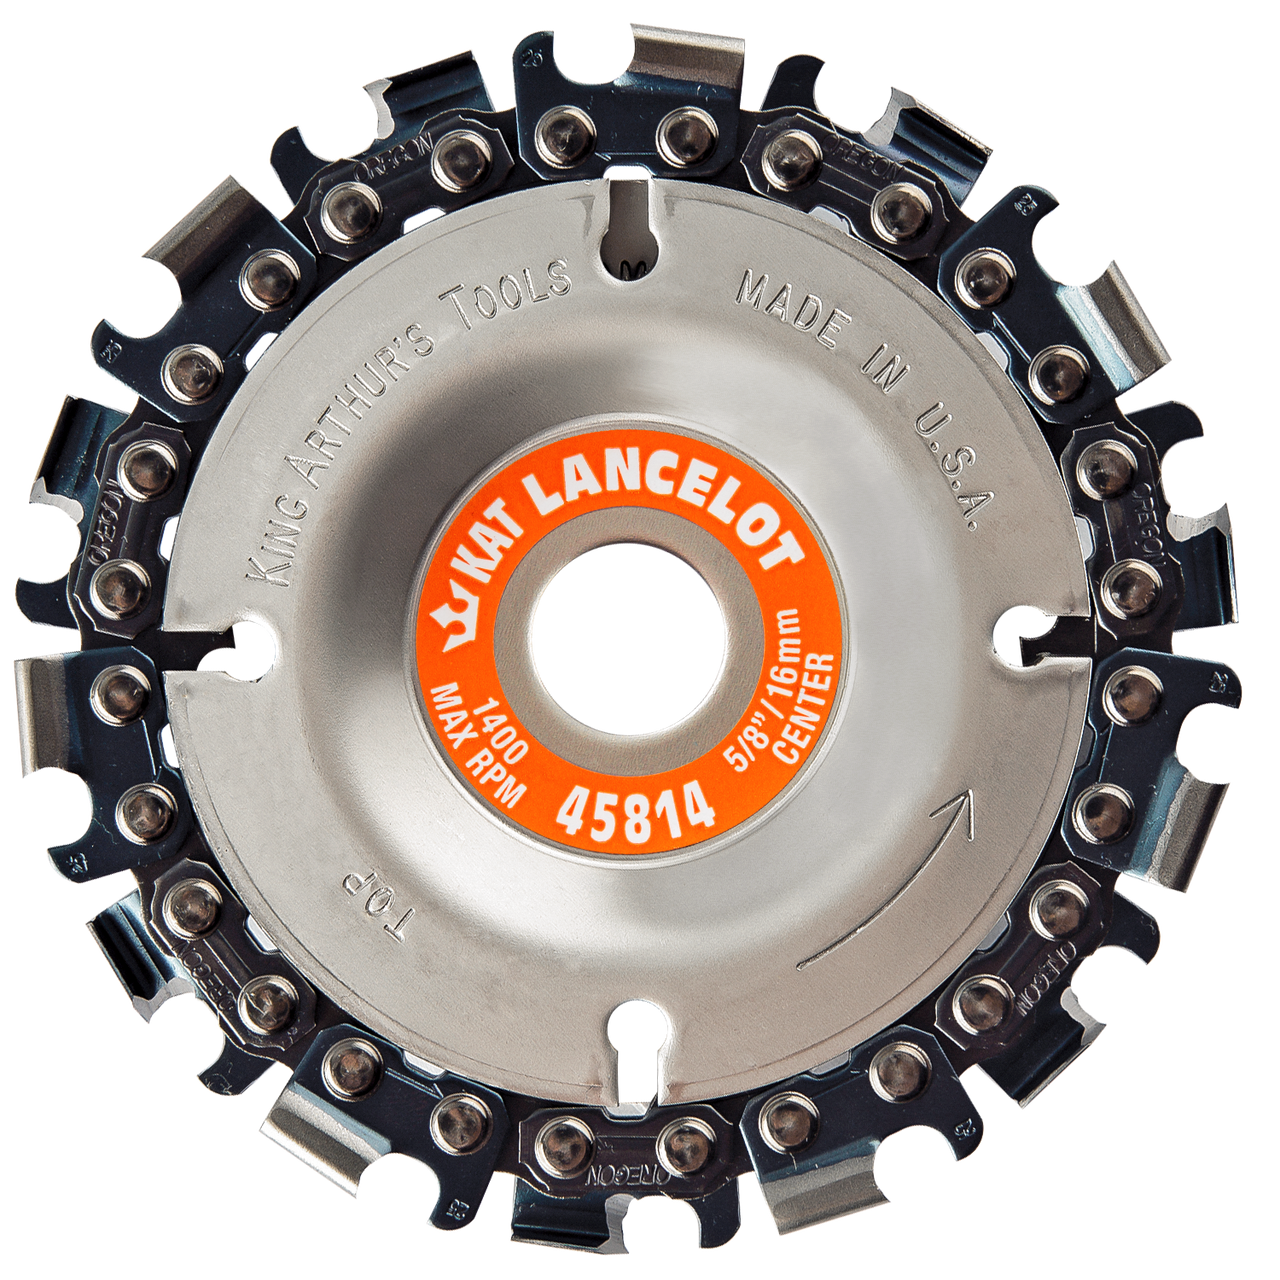 Lancelot 14 Tooth Chainsaw Disc